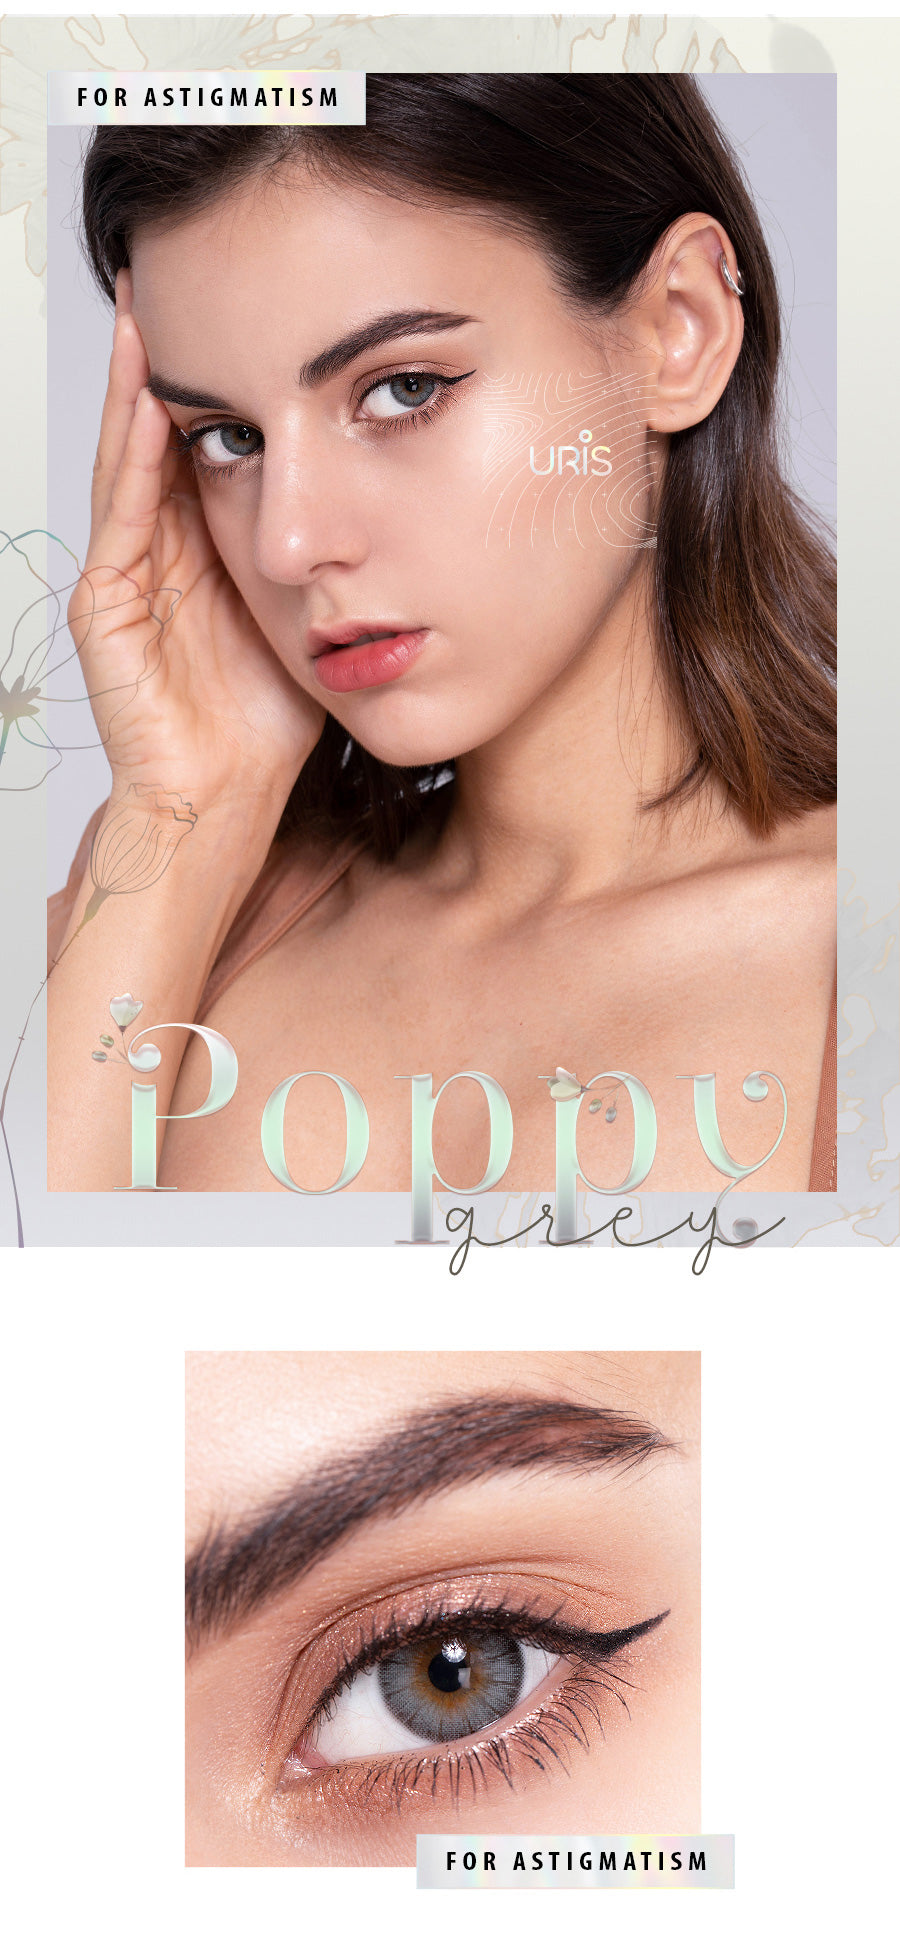 Uris Poppy grey natural toric colored contact lenses for astigmatism